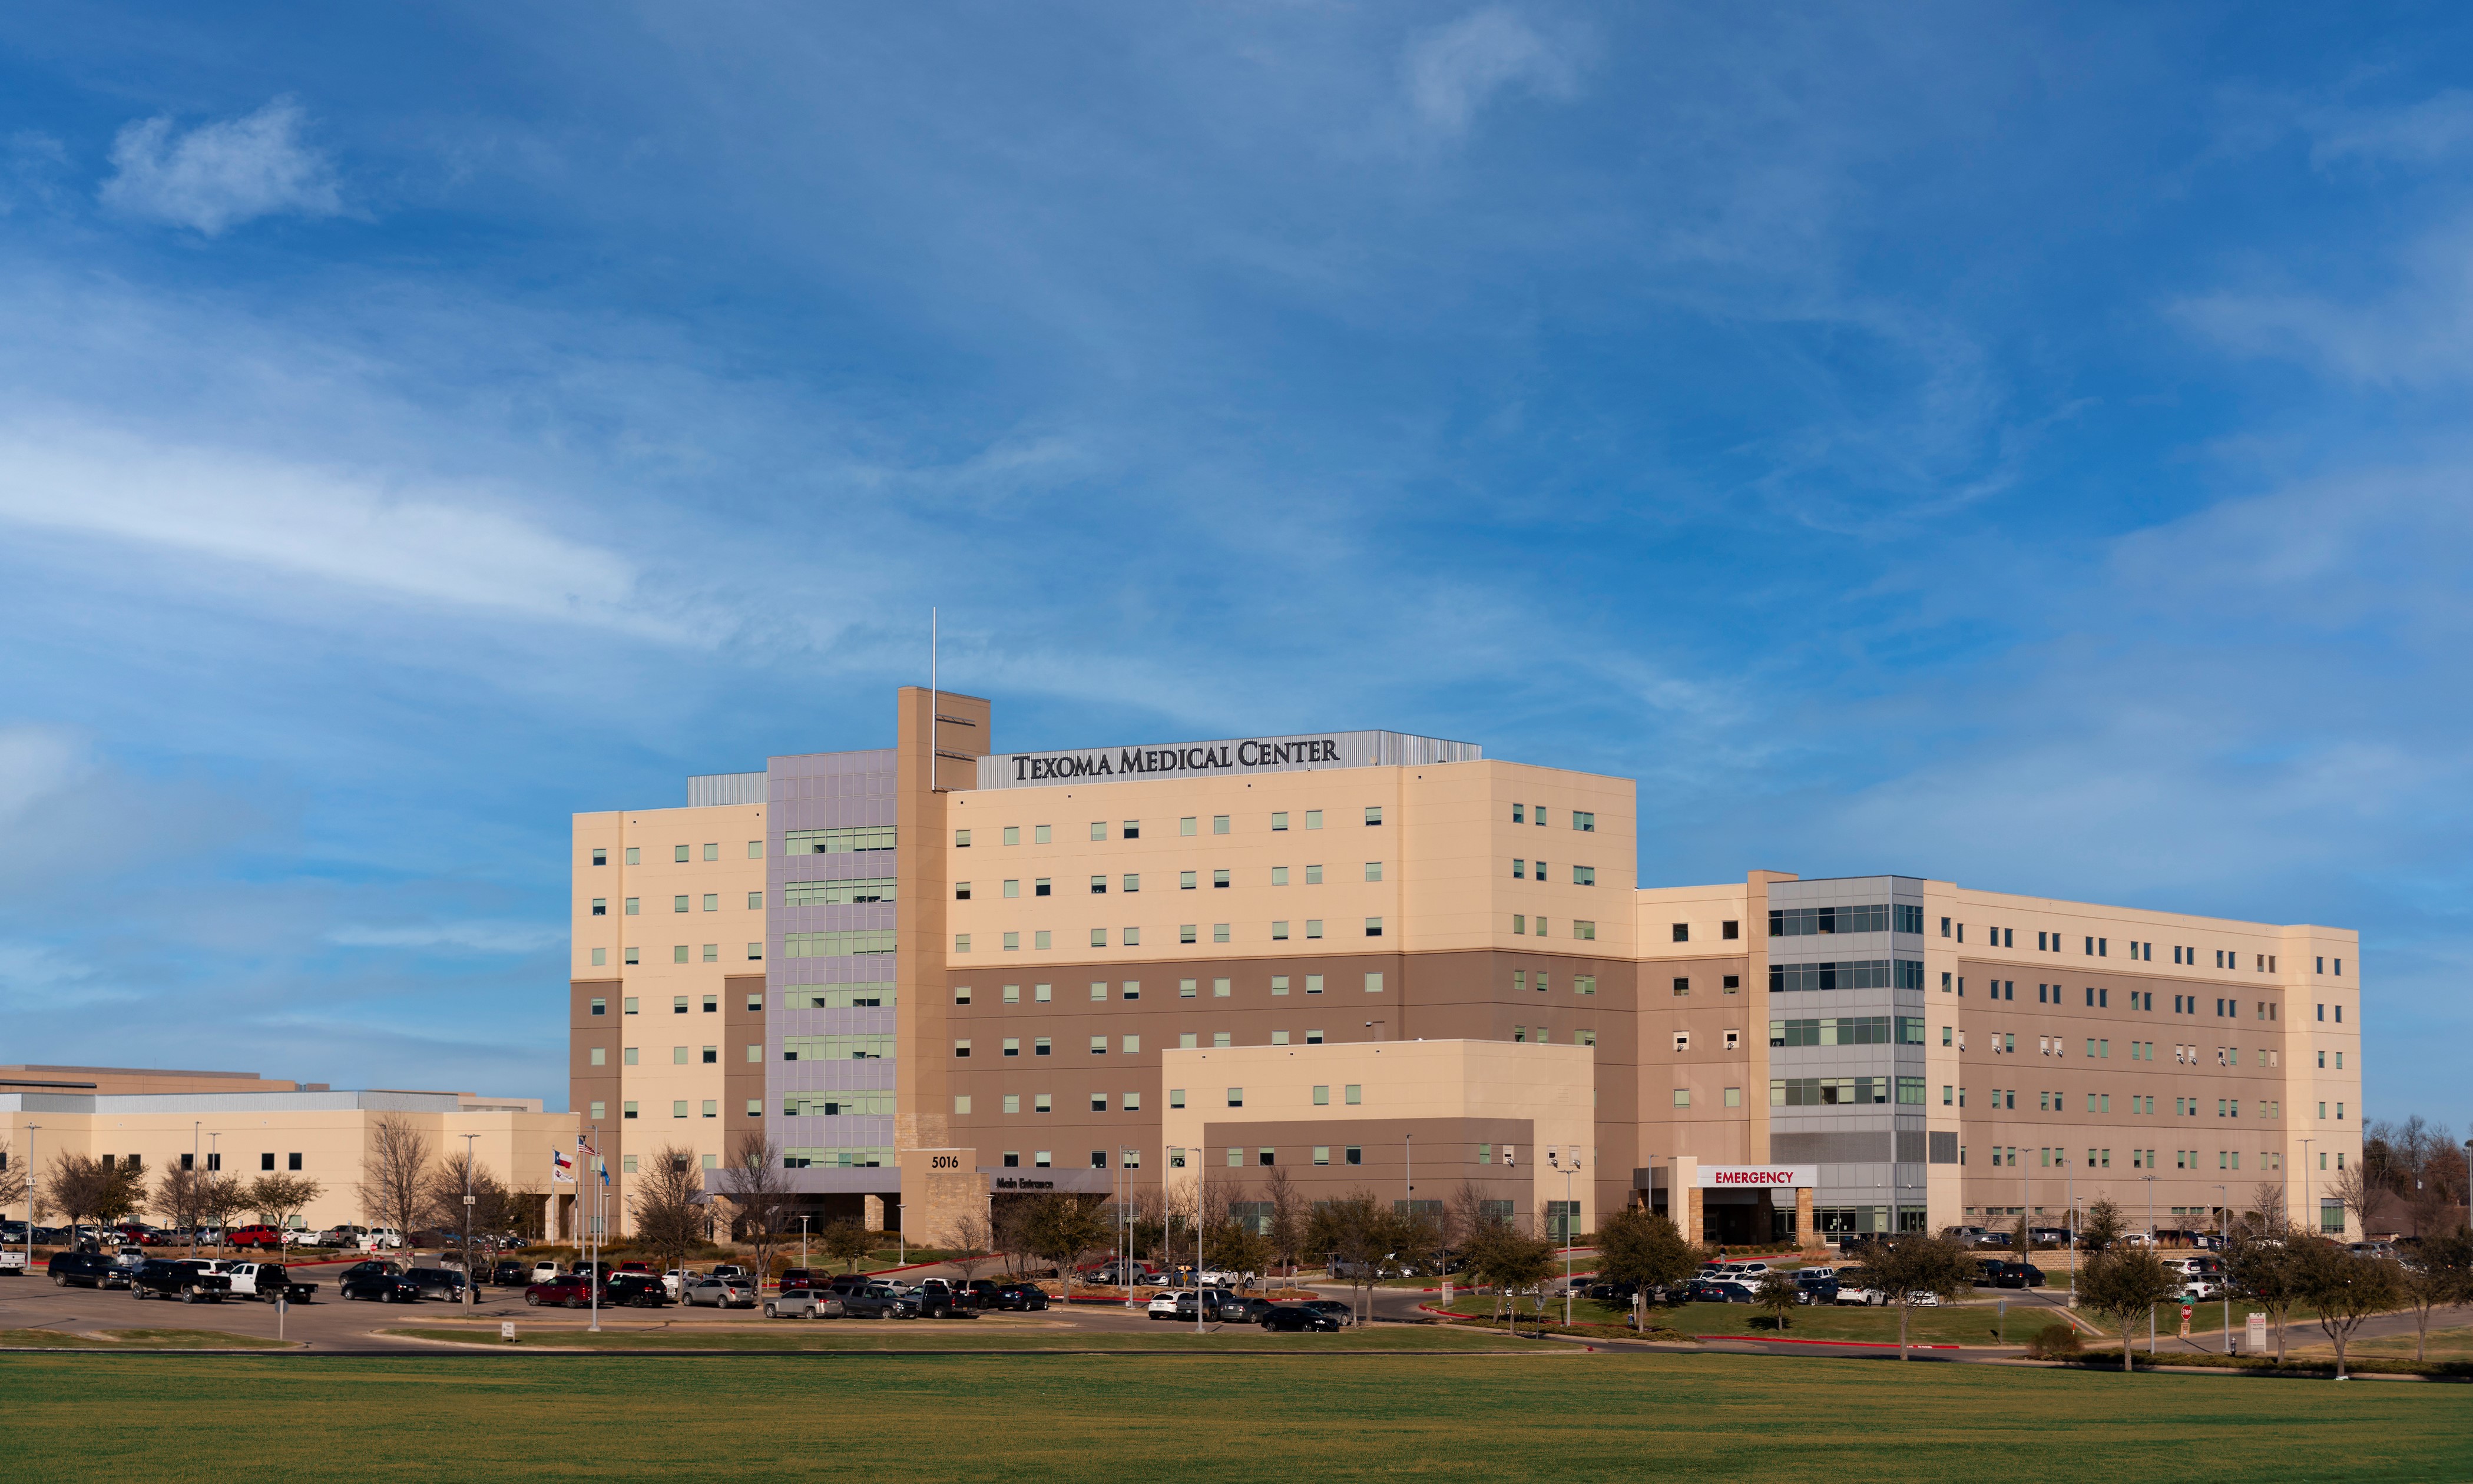 Texoma Medical Center offers quality healthcare services, located in Denison, Texas.